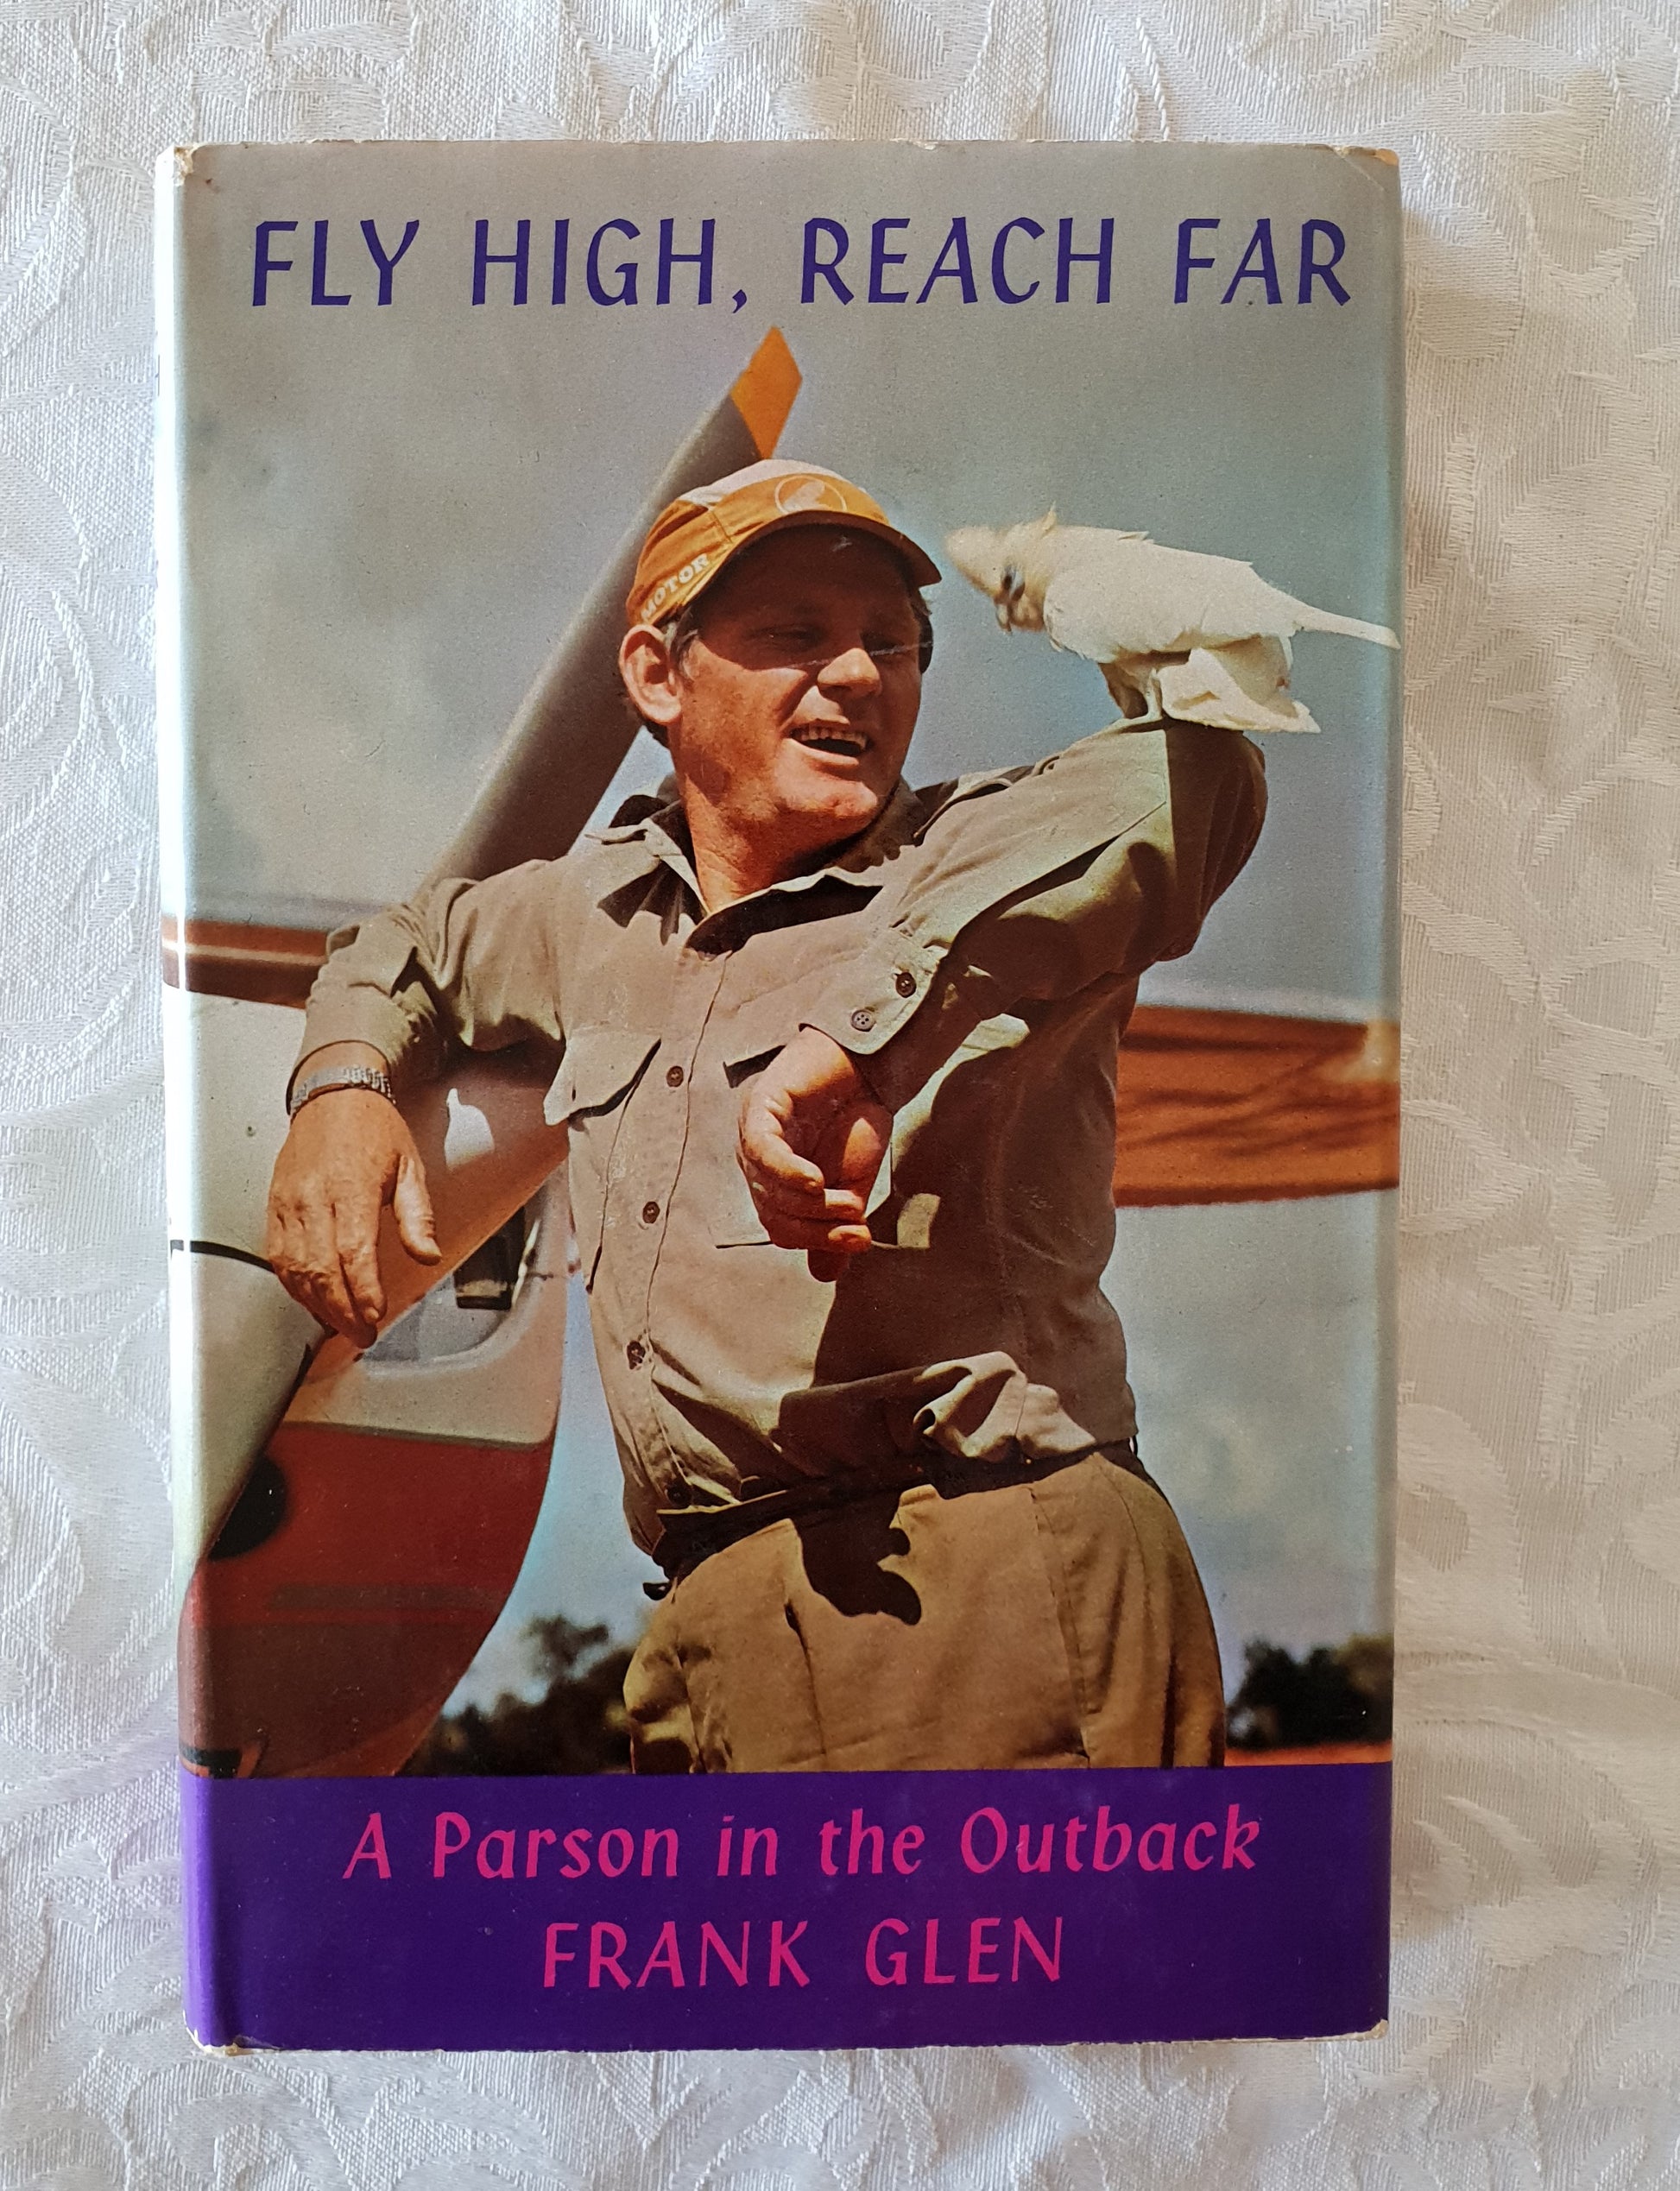 Fly High, Reach Far  A Parson in the Outback  by Frank Glen